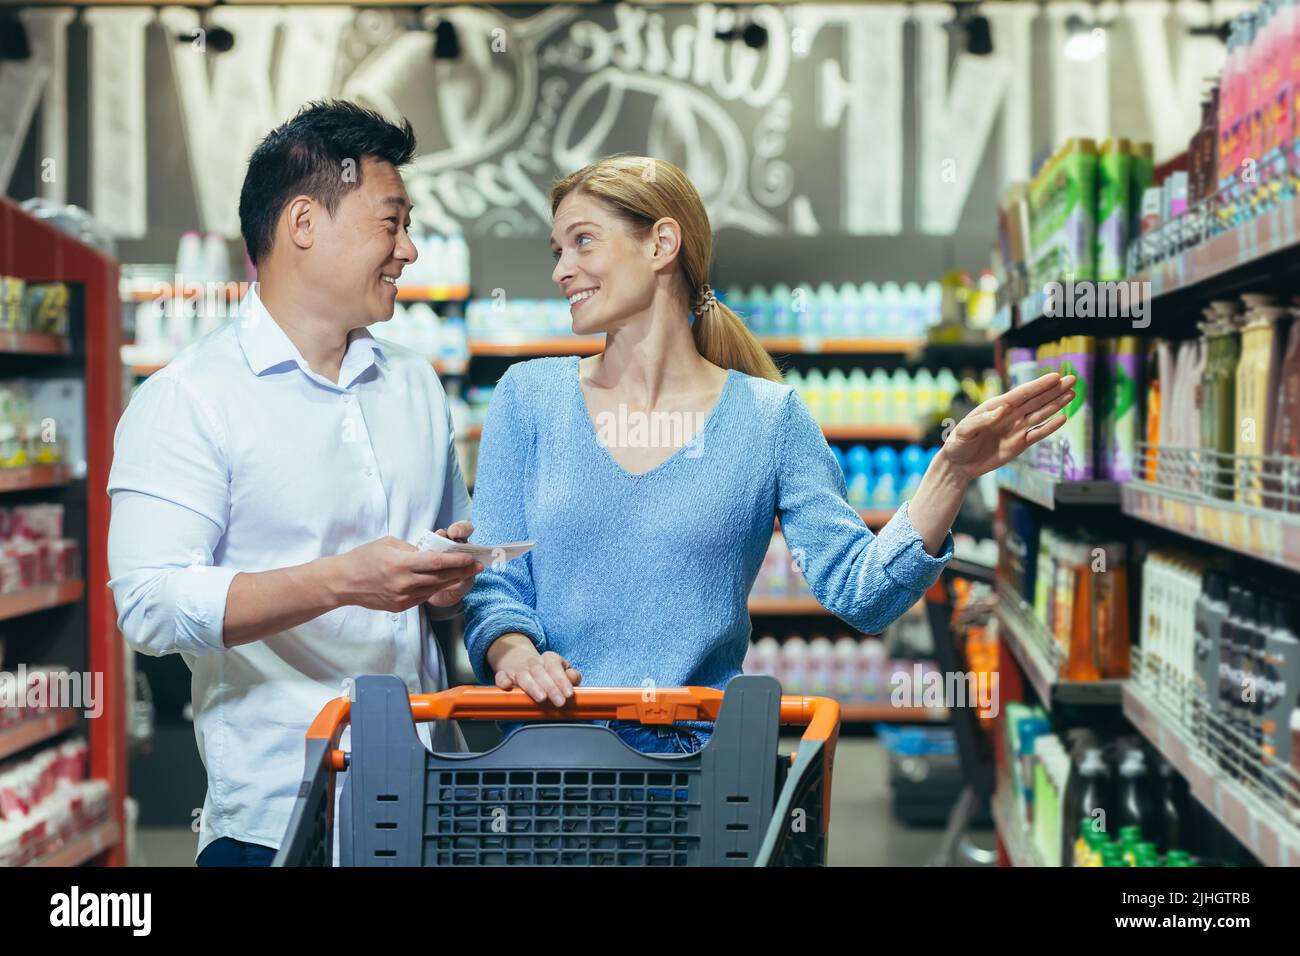 Happy shoppers Asian man and woman buy and choose goods in supermarket, family shopping Stock Photo